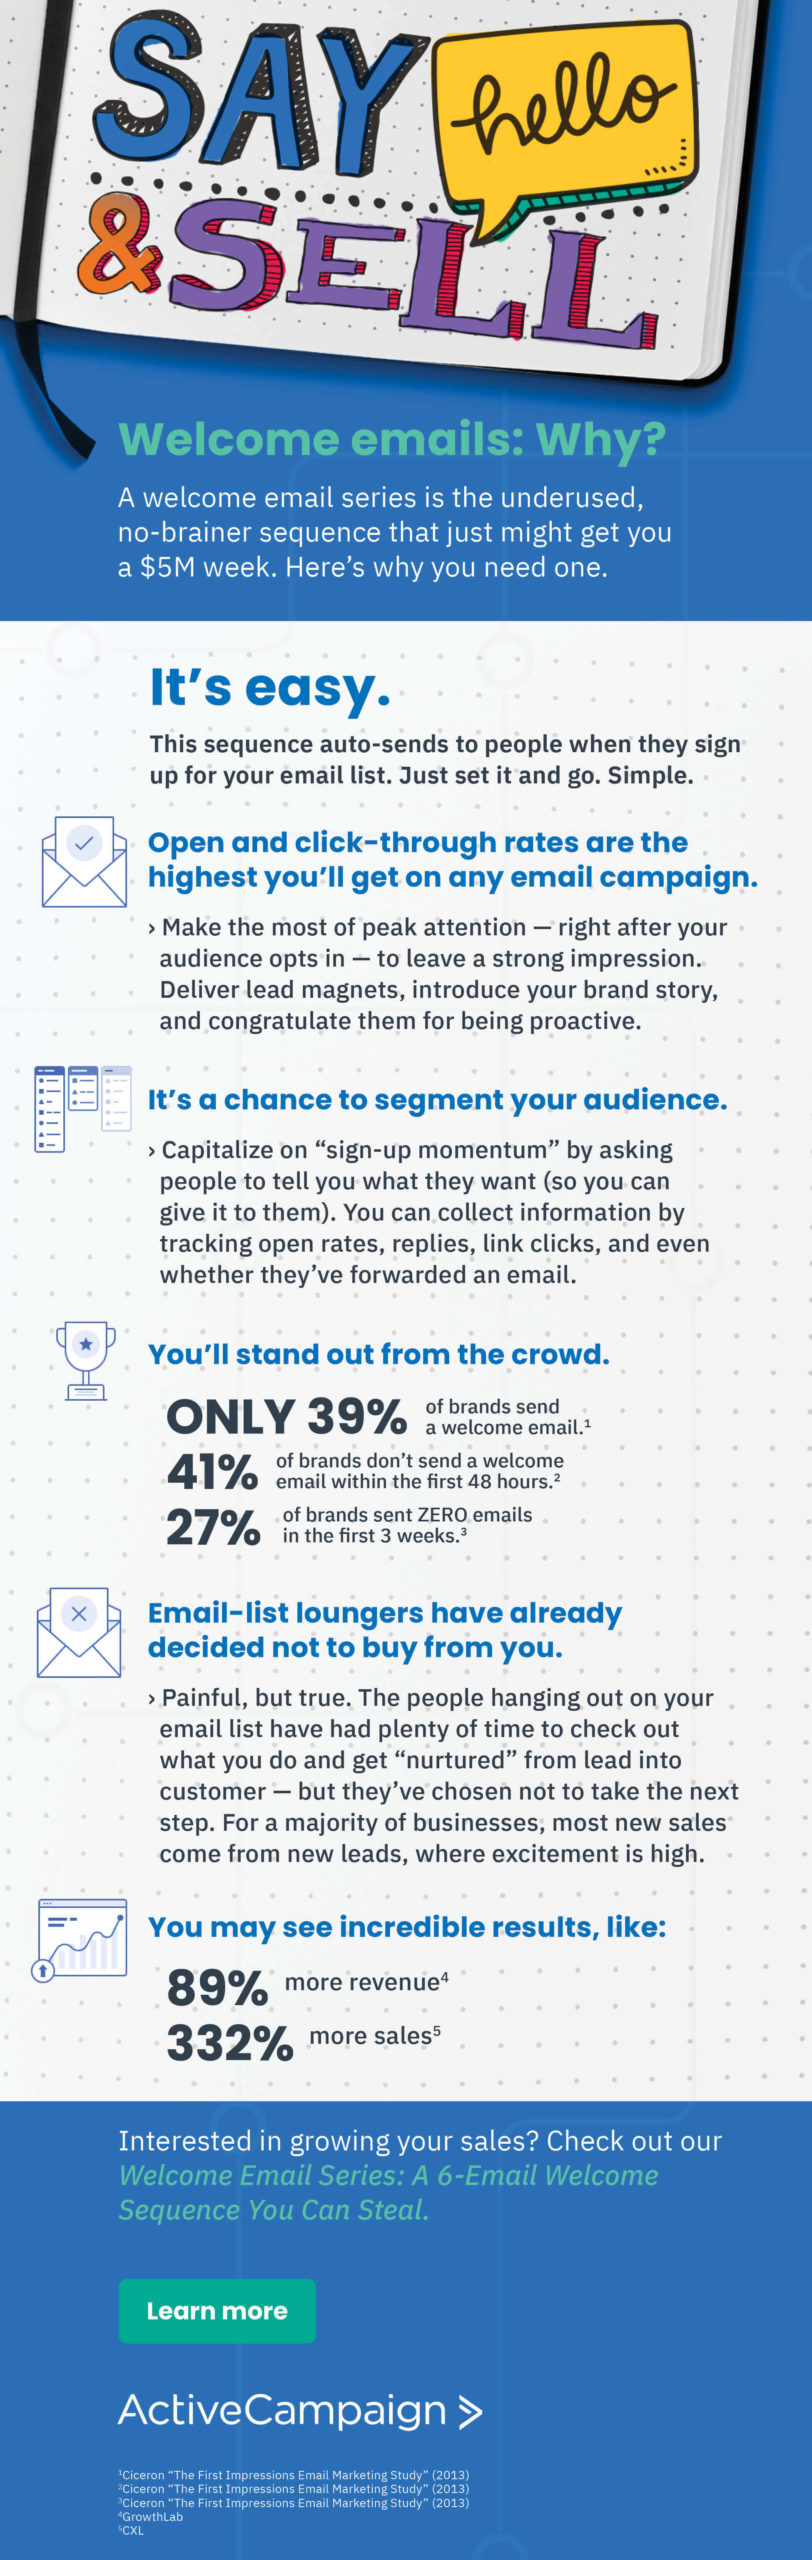 welcome series email infographic by ActiveCampaign